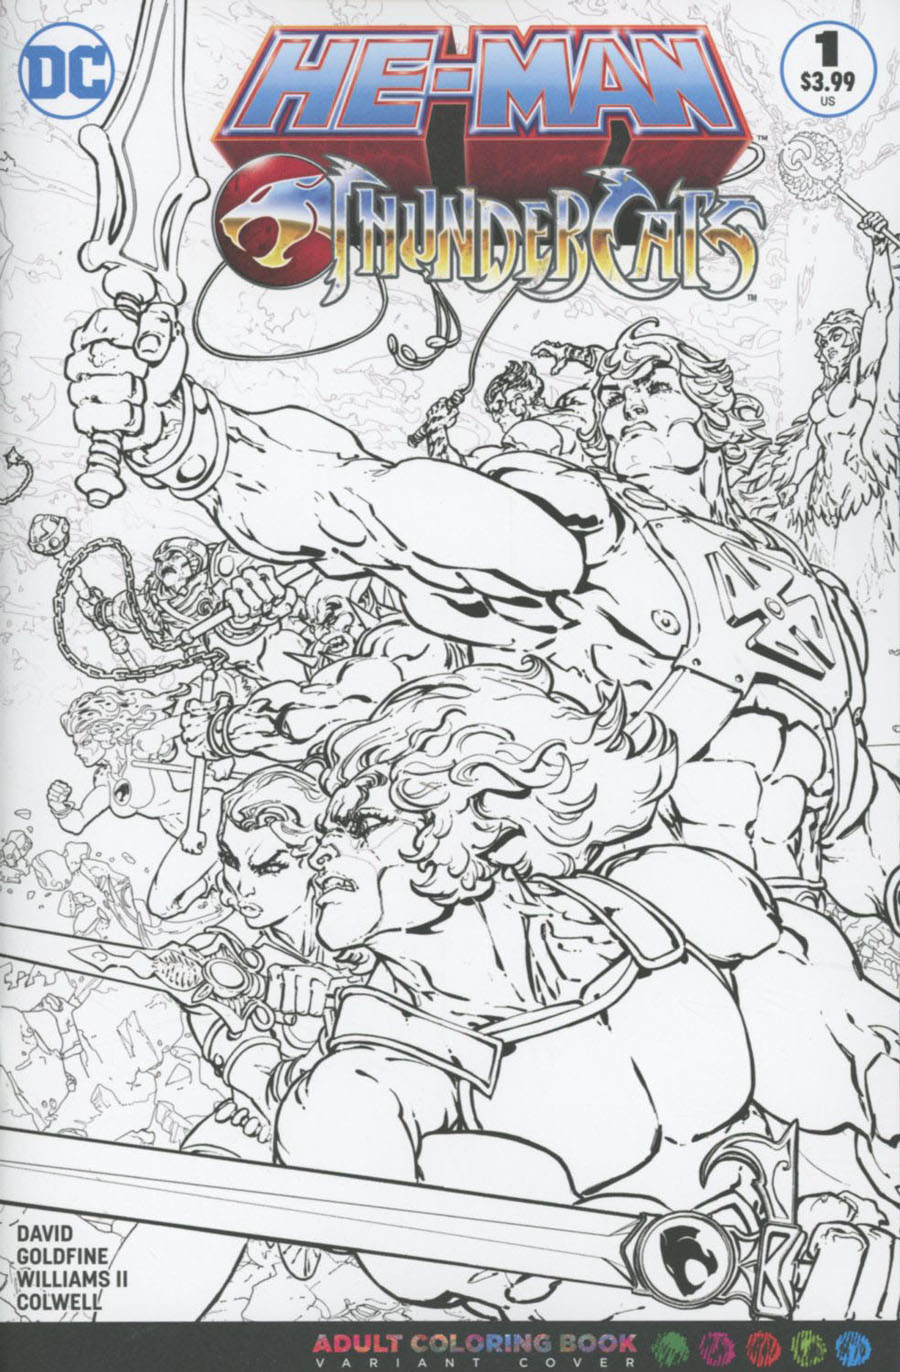 He-Man Thundercats #1 Cover C Variant Freddie E Williams II Wraparound Adult Coloring Book Cover